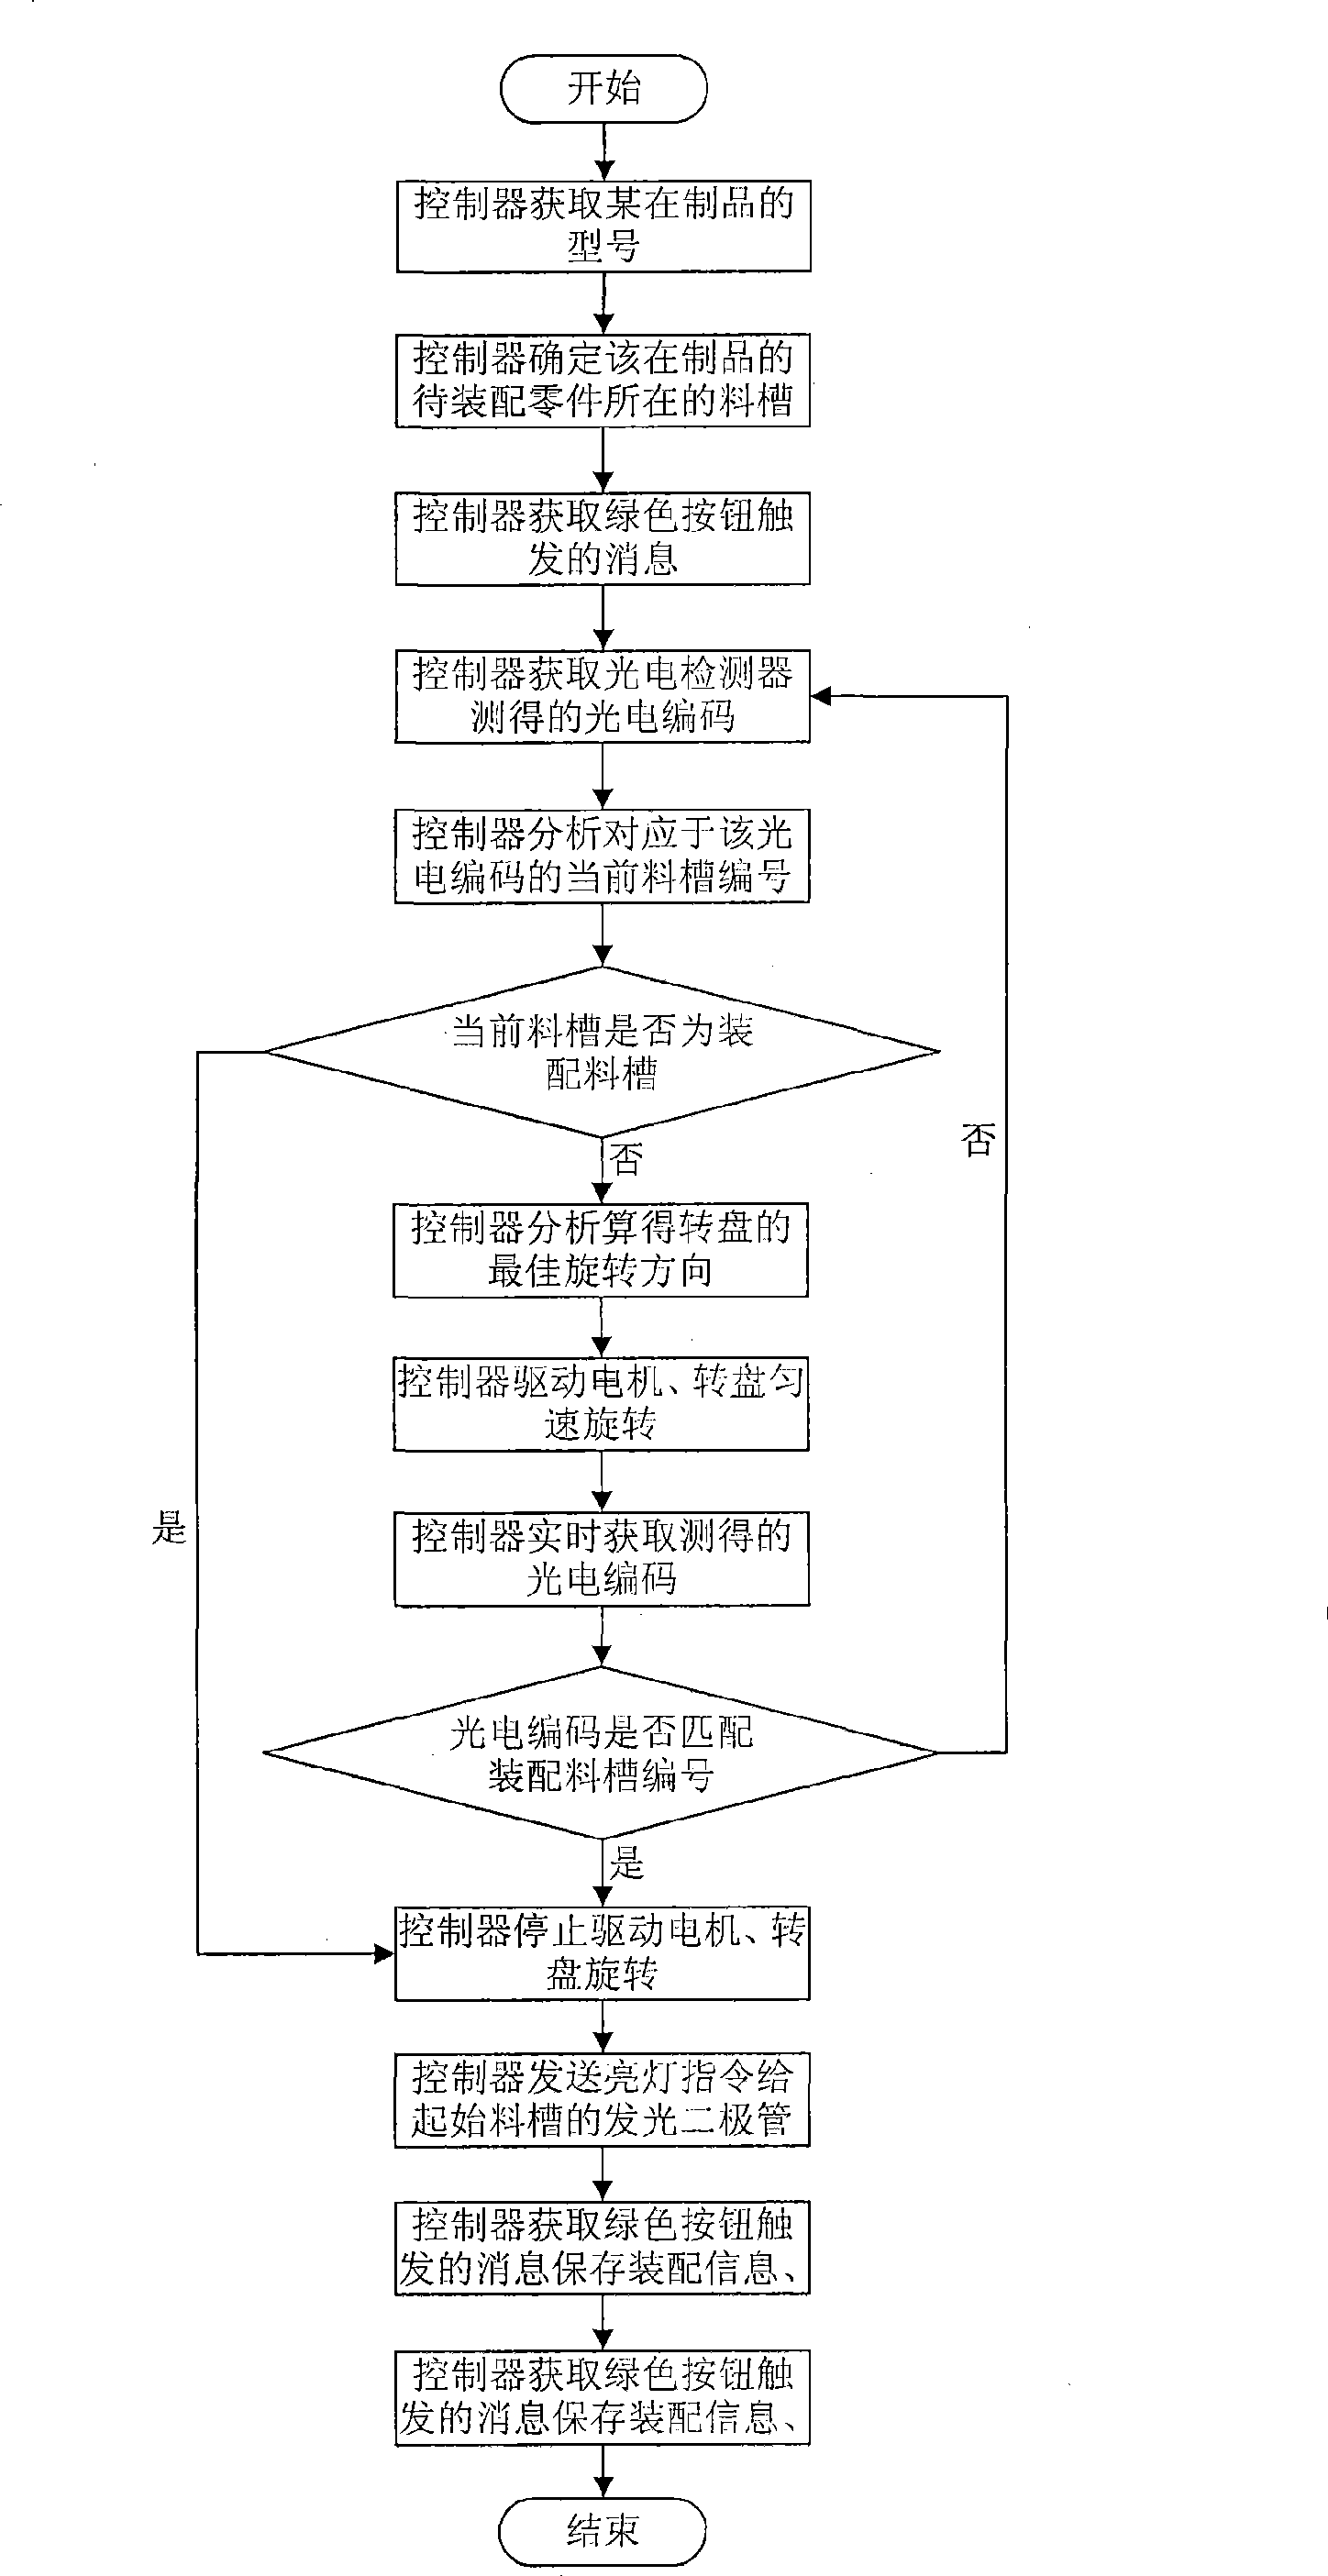 Automatic feeding device for mixed flow assembly line